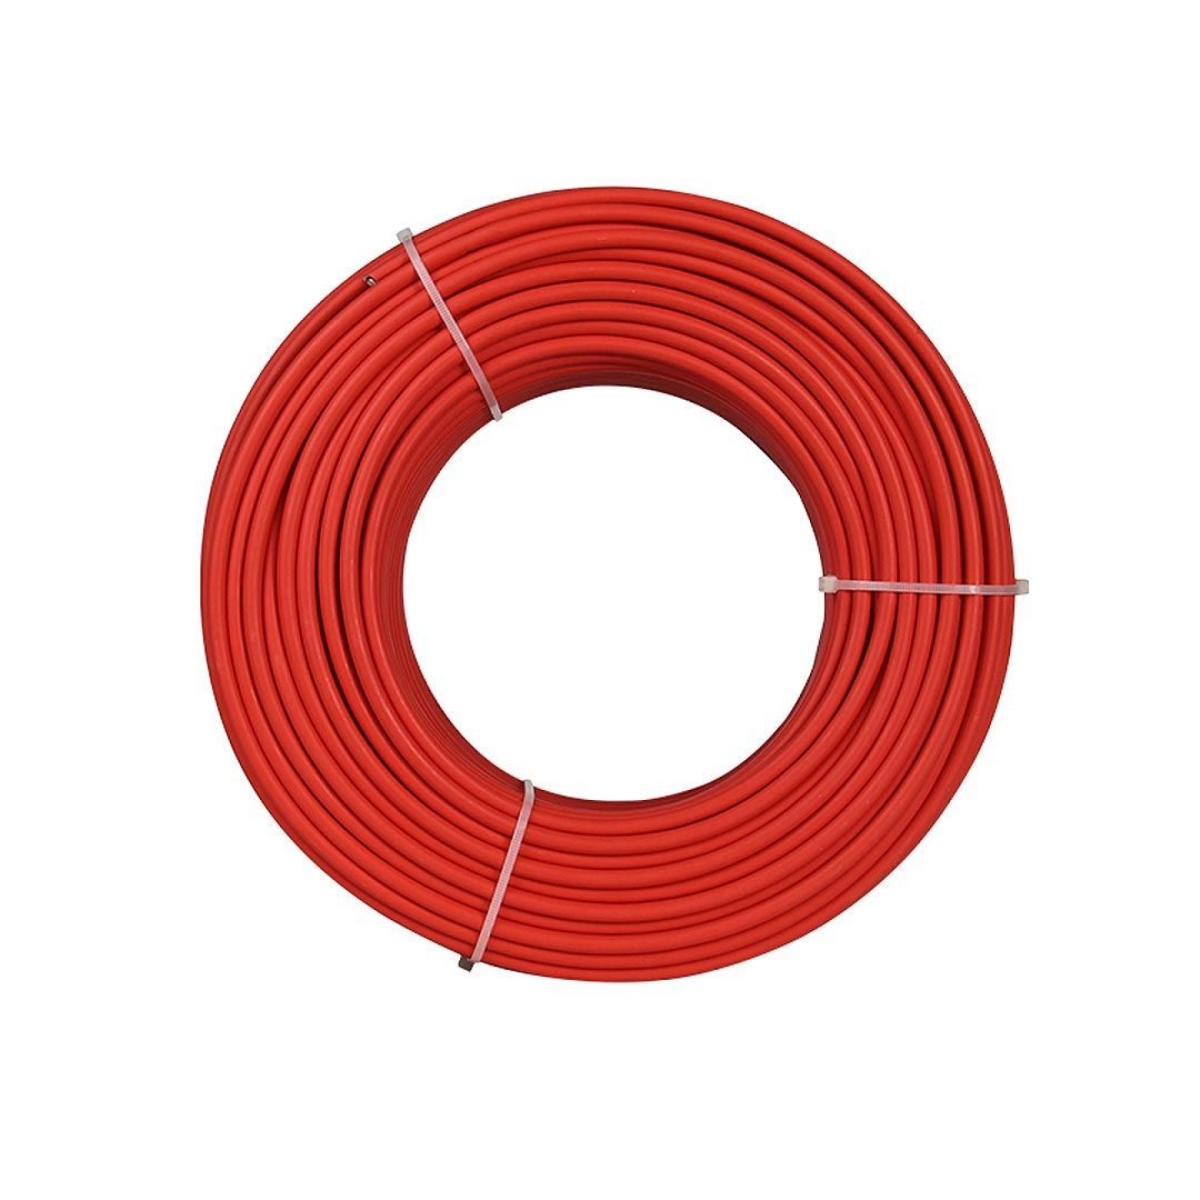 TommaTech 4.0 mm² Solar Cable PVI1-F Red 1 Meter